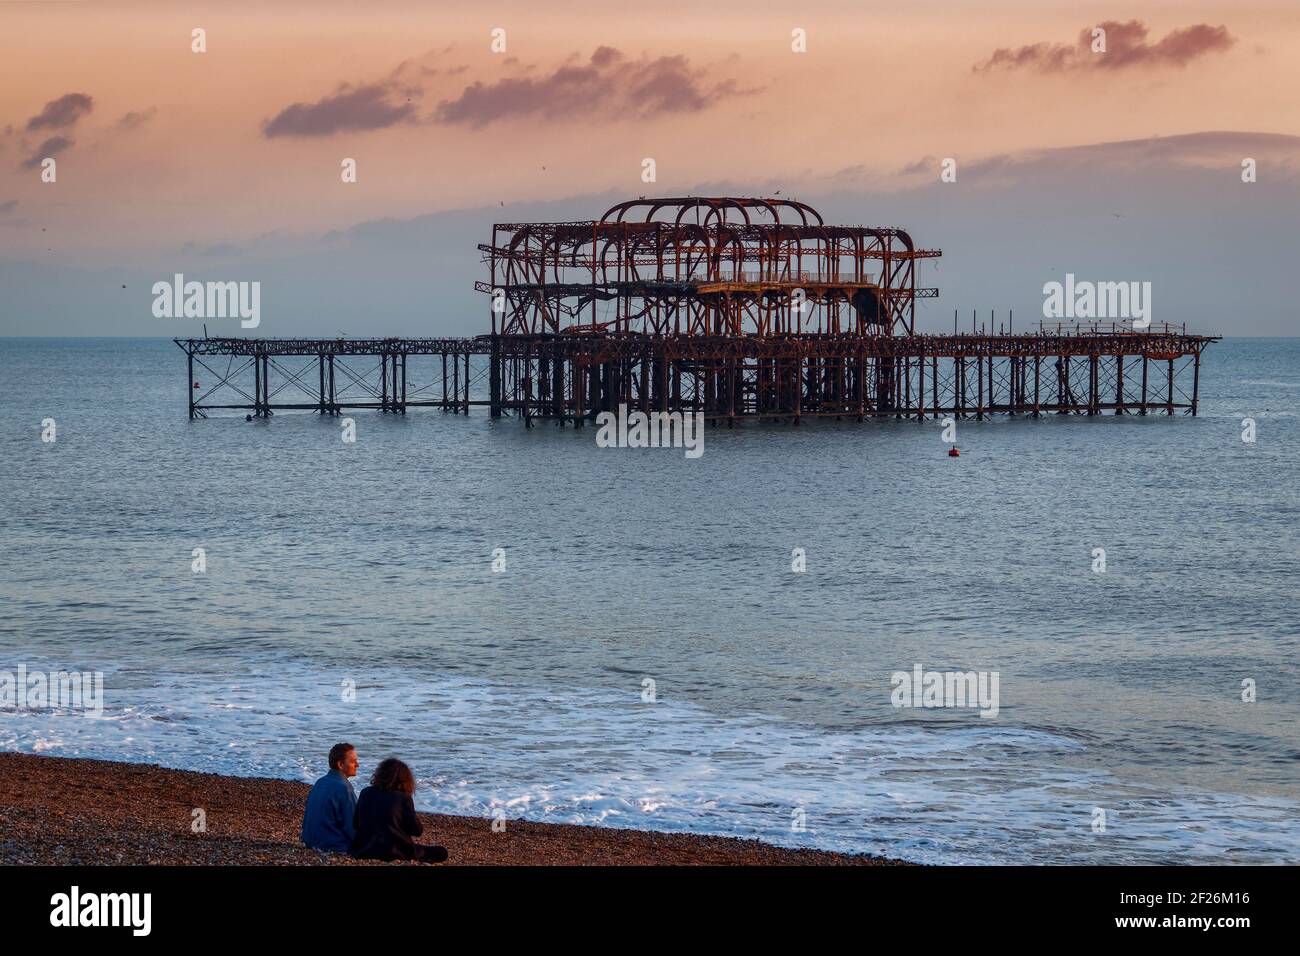 BRIGHTON, EAST SUSSEX/UK - JANUARY 26 : View of the derelict West Pier in Brighton East Sussex on January 26, 2018. Unidentified Stock Photo